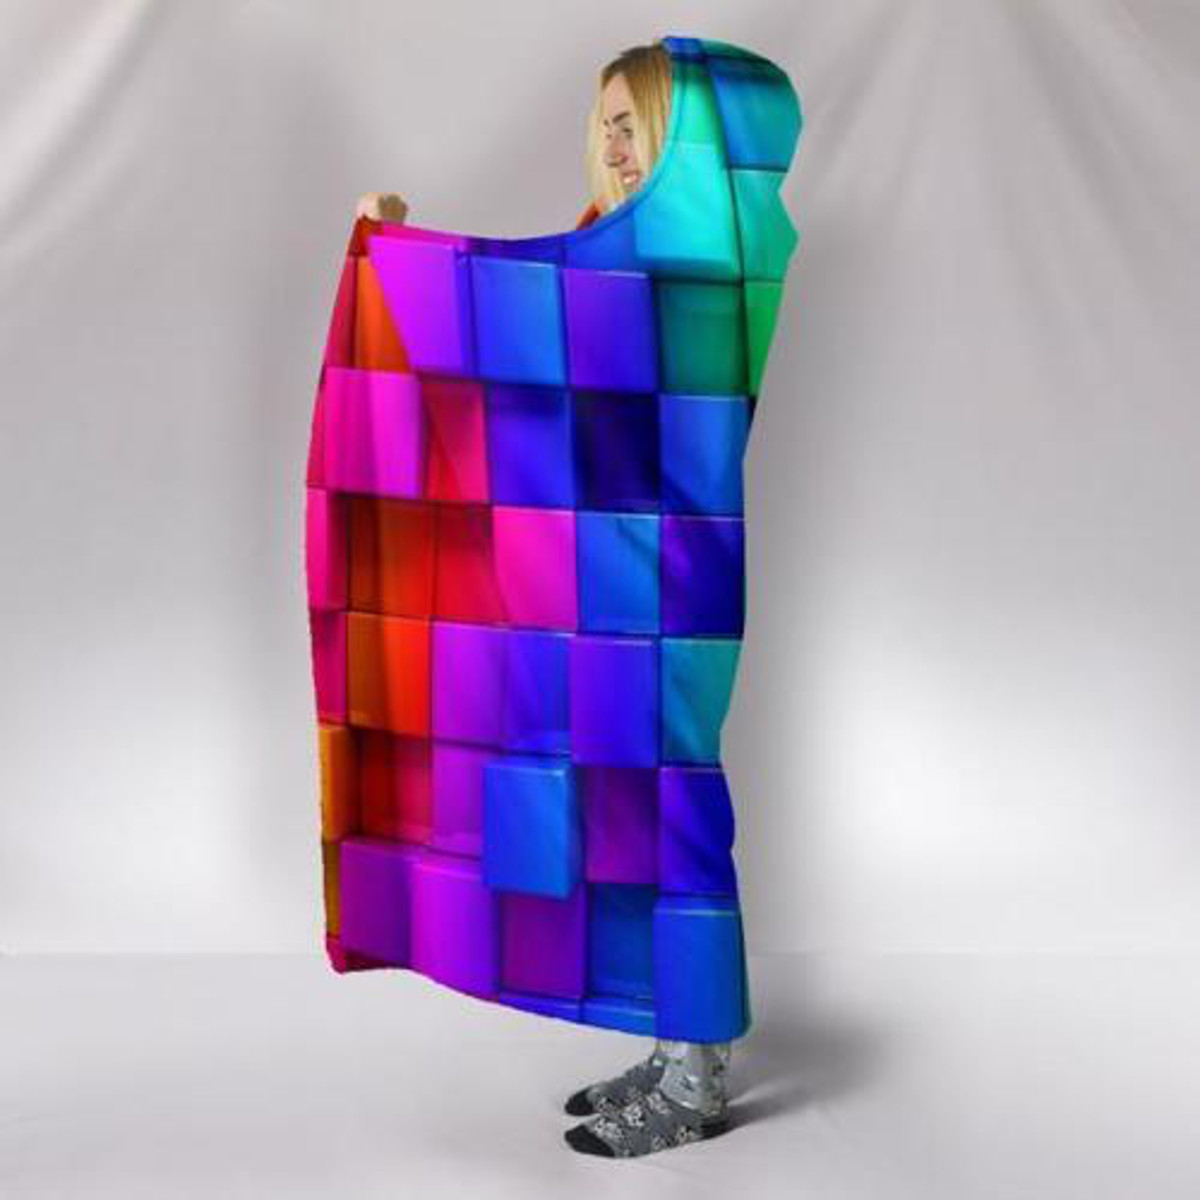 Warm-3D-Colored-Cubes-Hooded-Blankets-Wearable-Soft-Towel-Plush-Mat-For-Adult-Kid-1404287-4